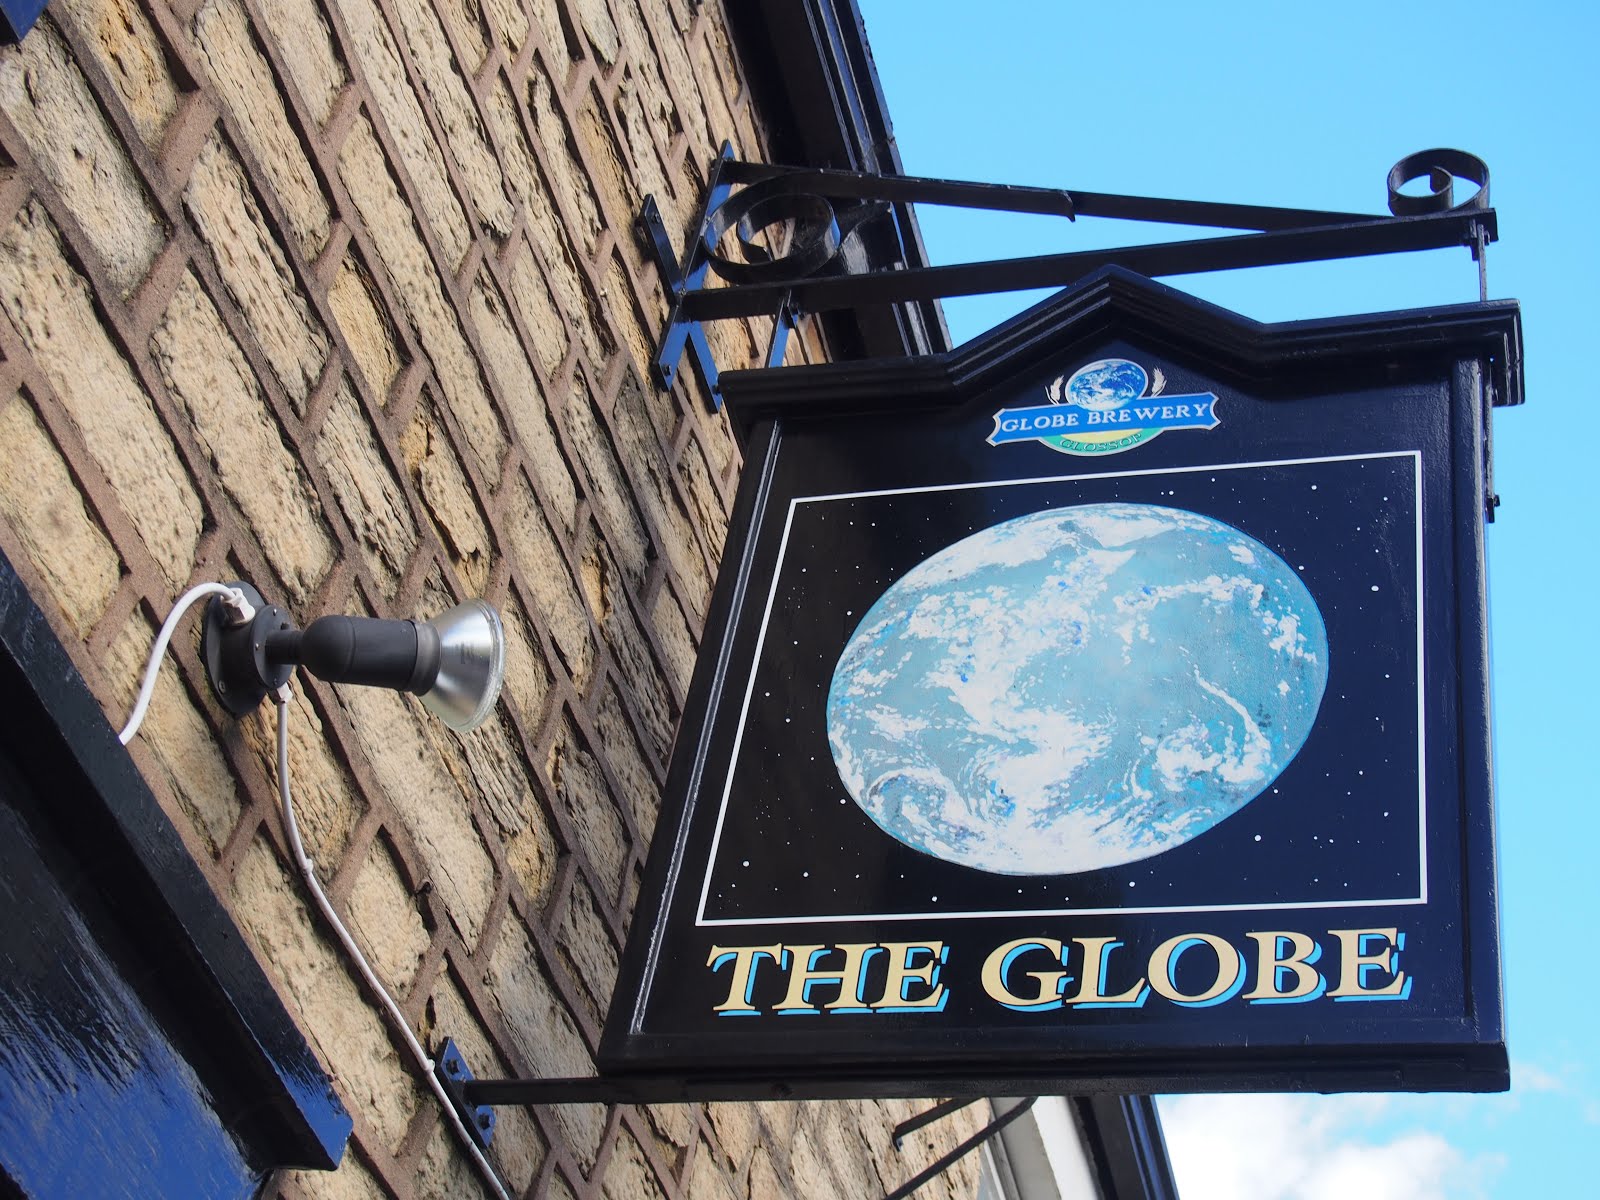 About The Globe